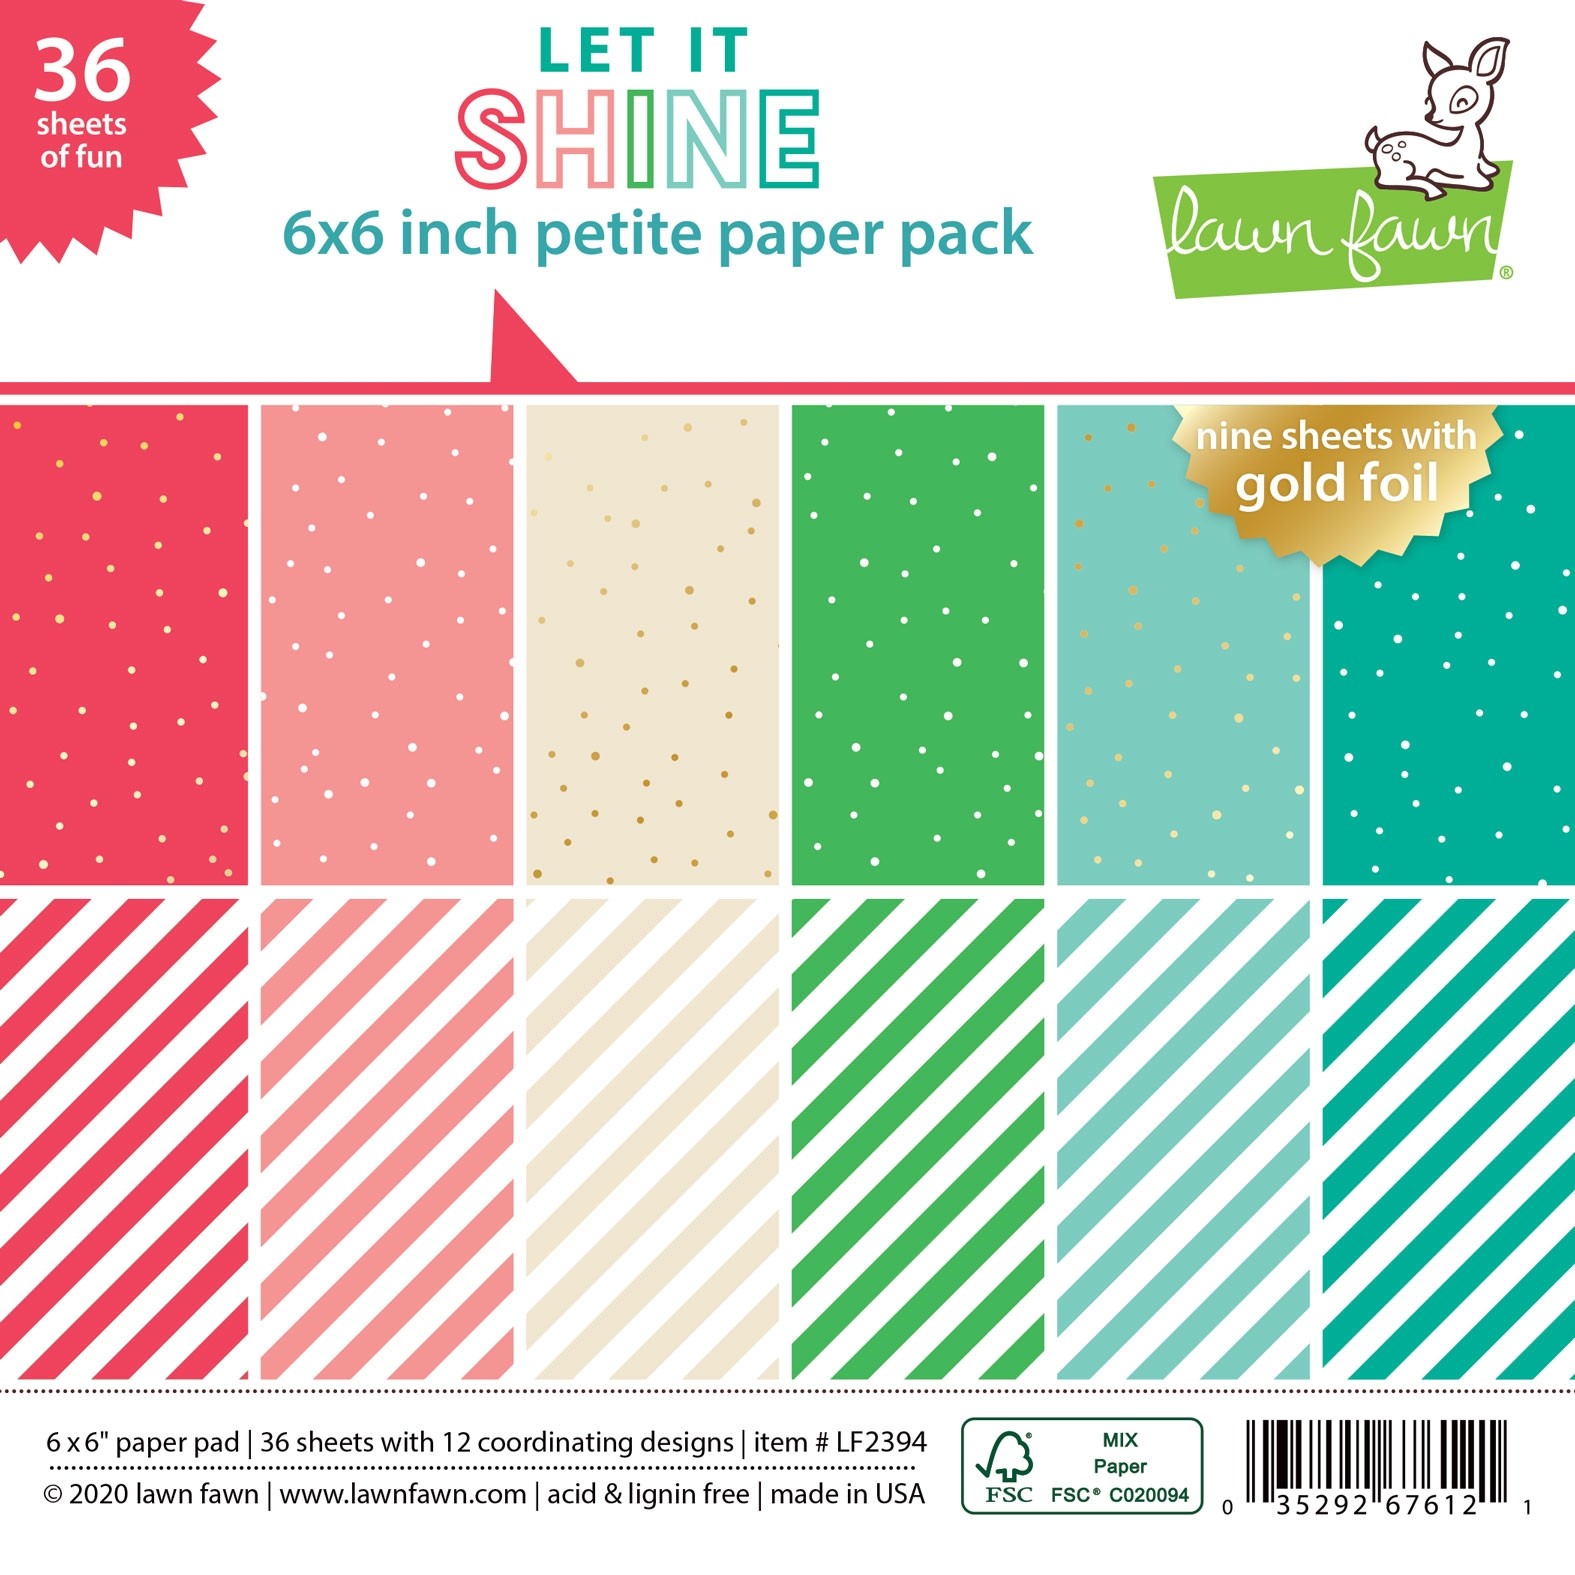 Lawn Fawn Let it Shine Paper Pack LF2394